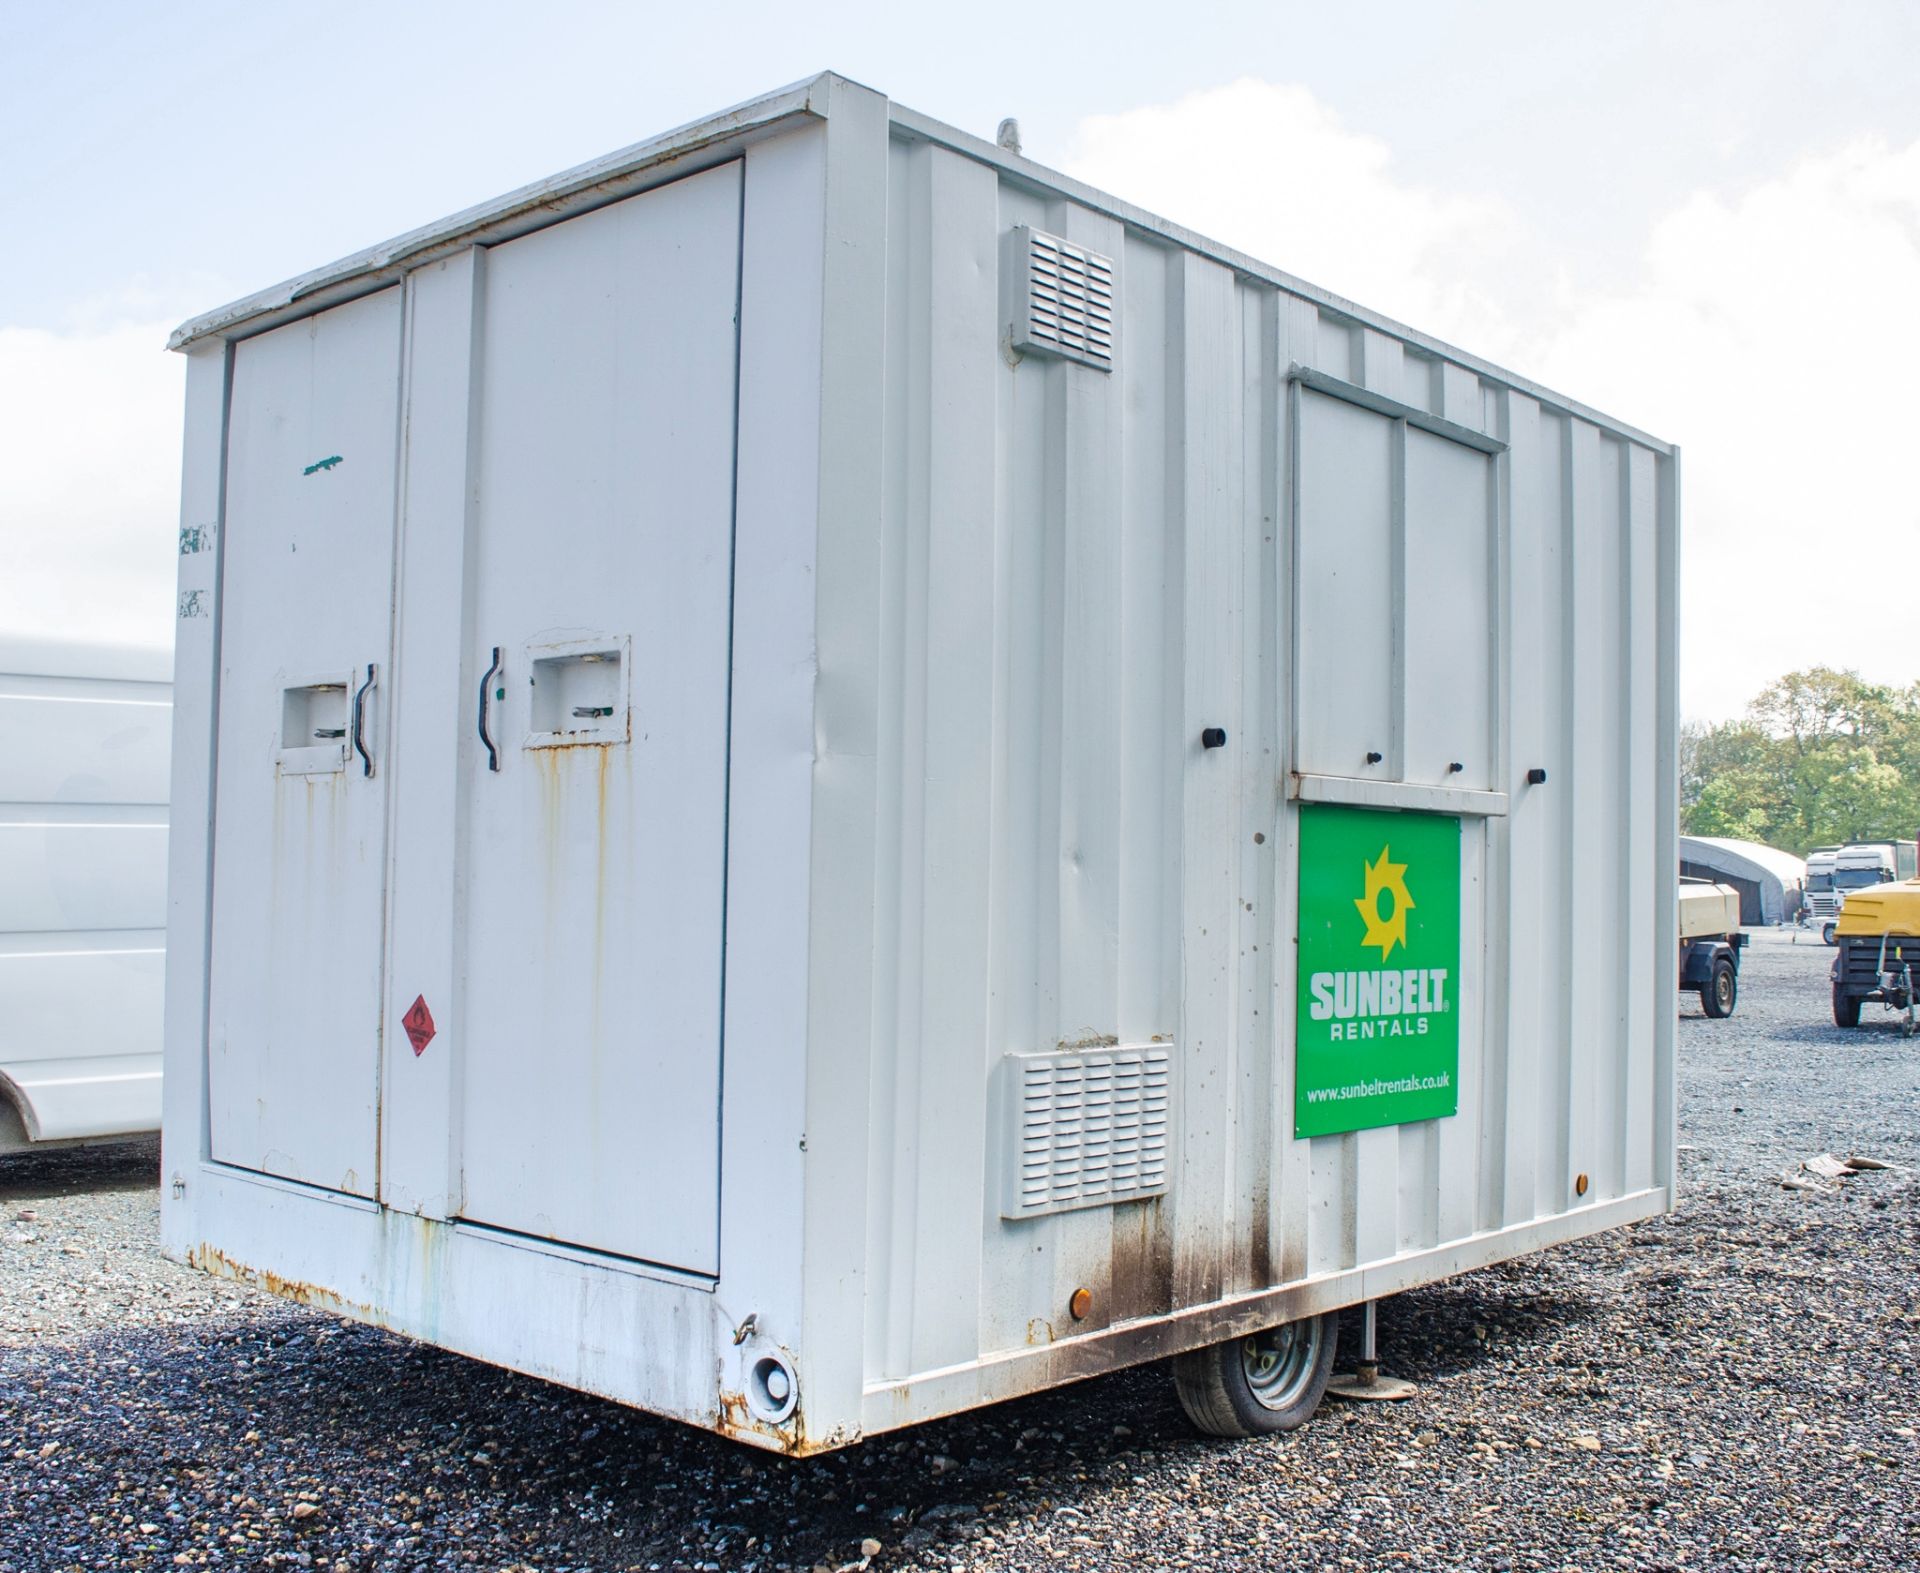 Groundhog 12 ft x 8 ft mobile welfare unit Comprising of: canteen area, toilet & generator room - Image 4 of 12